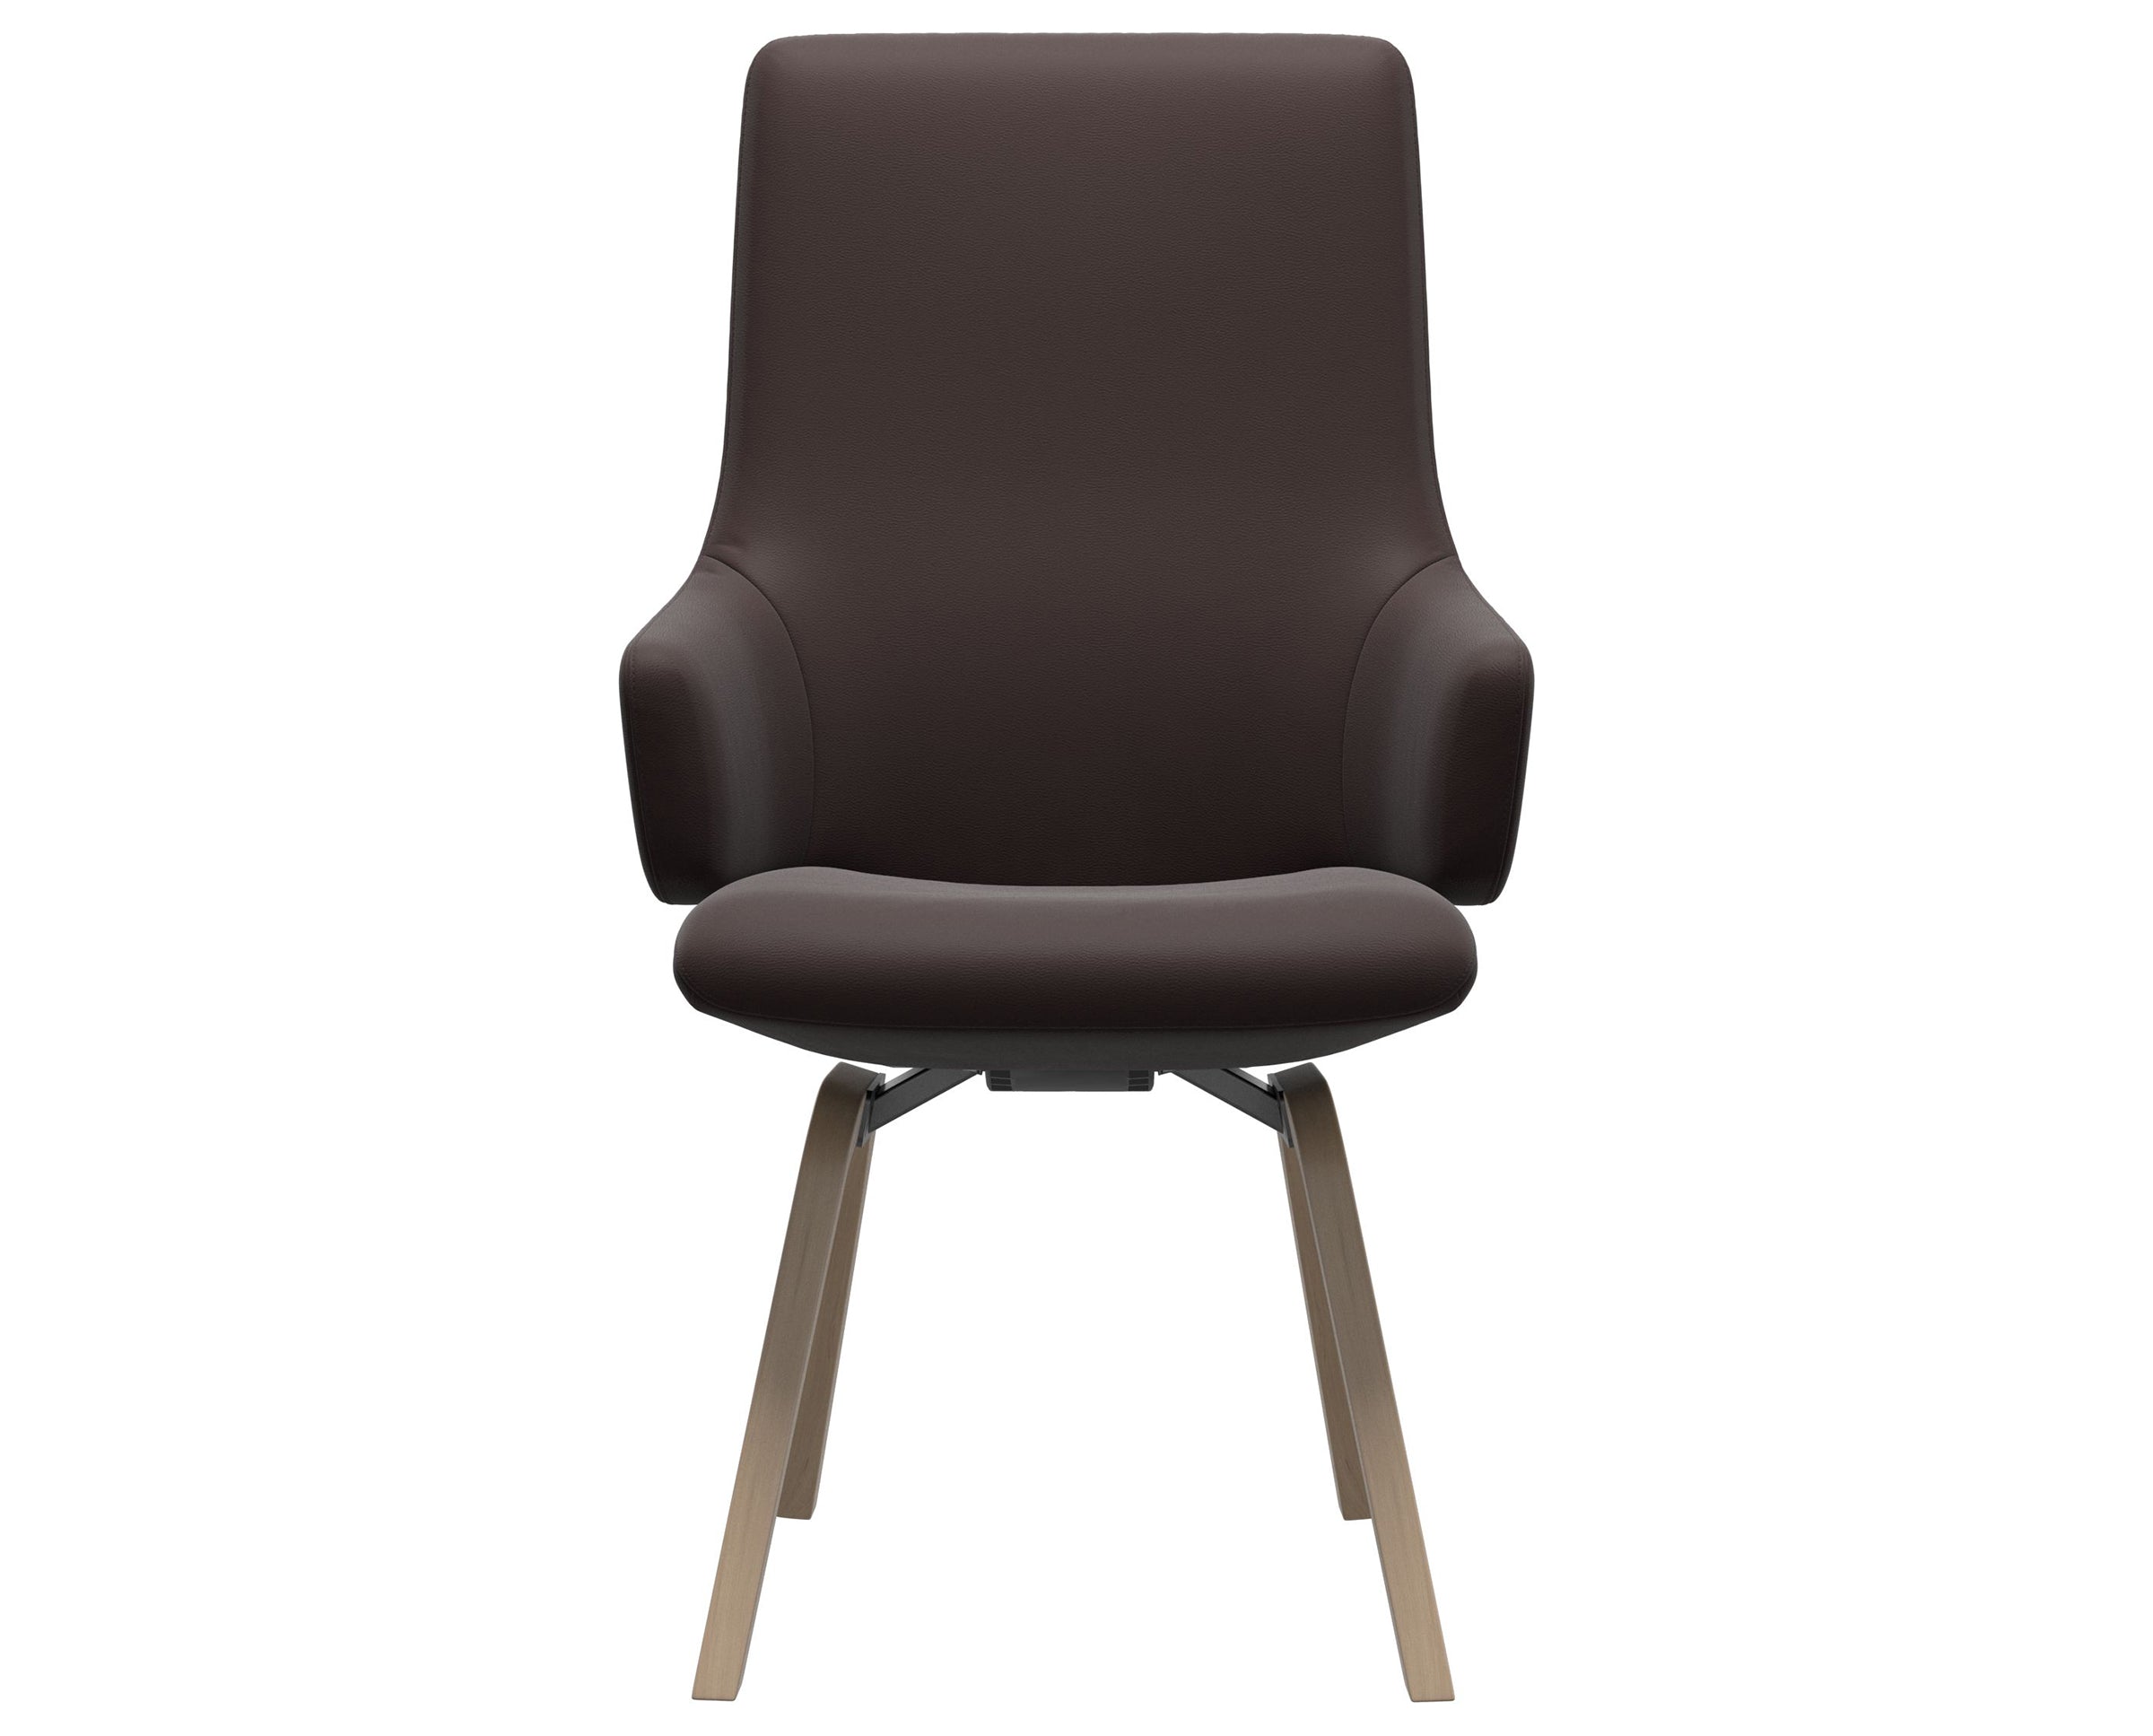 Paloma Leather Chocolate and Natural Base | Stressless Laurel High Back D200 Dining Chair w/Arms | Valley Ridge Furniture